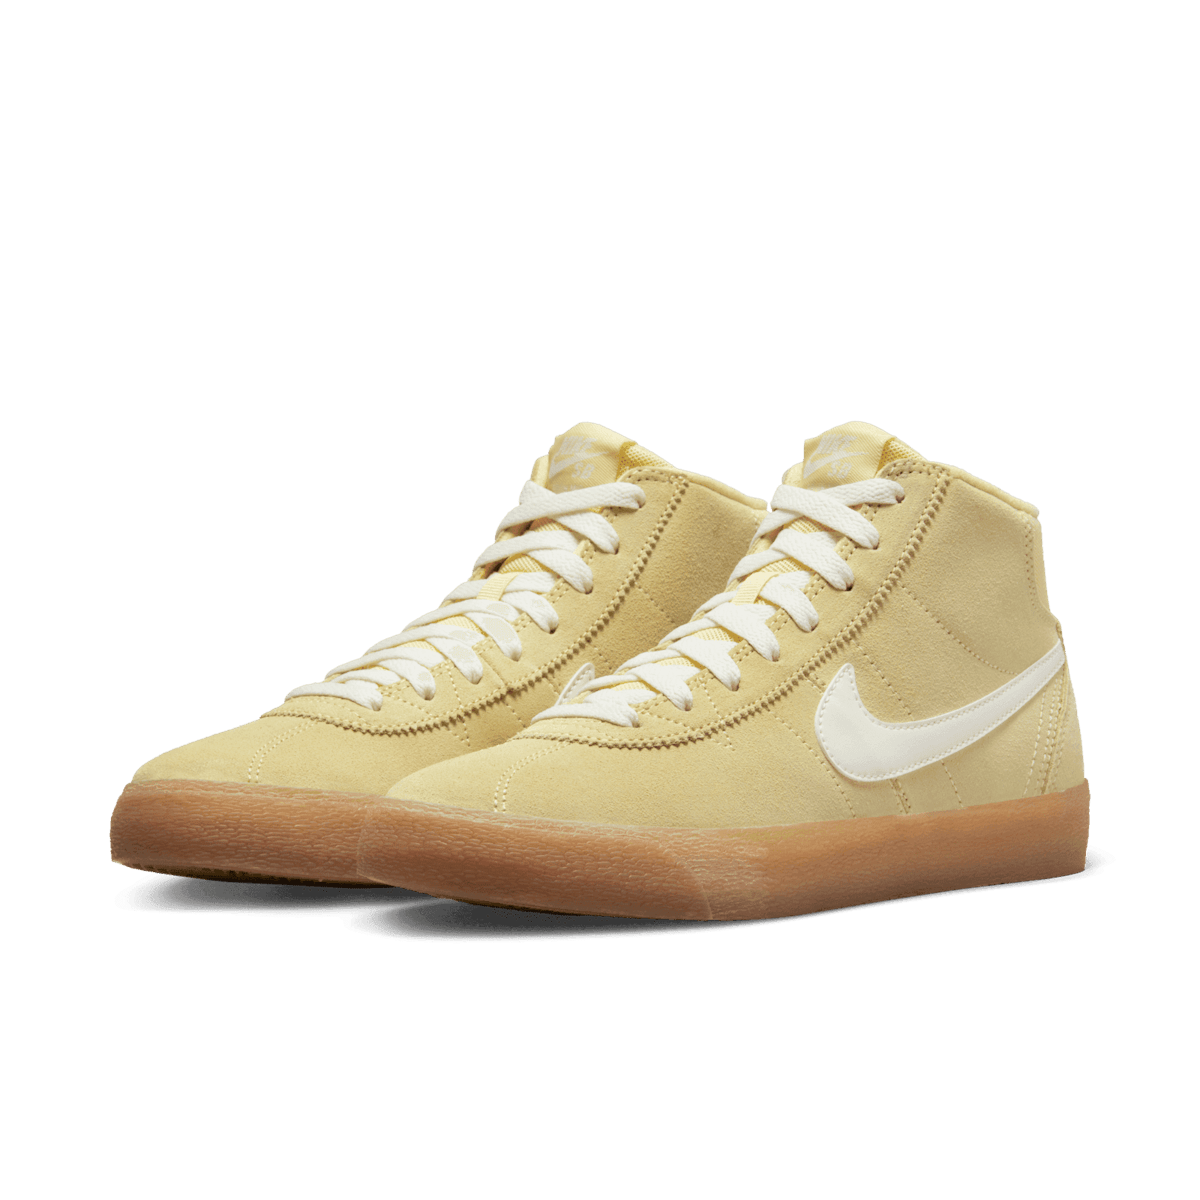 Nike SB Bruin High Skate Shoes in Yellow Angle 2